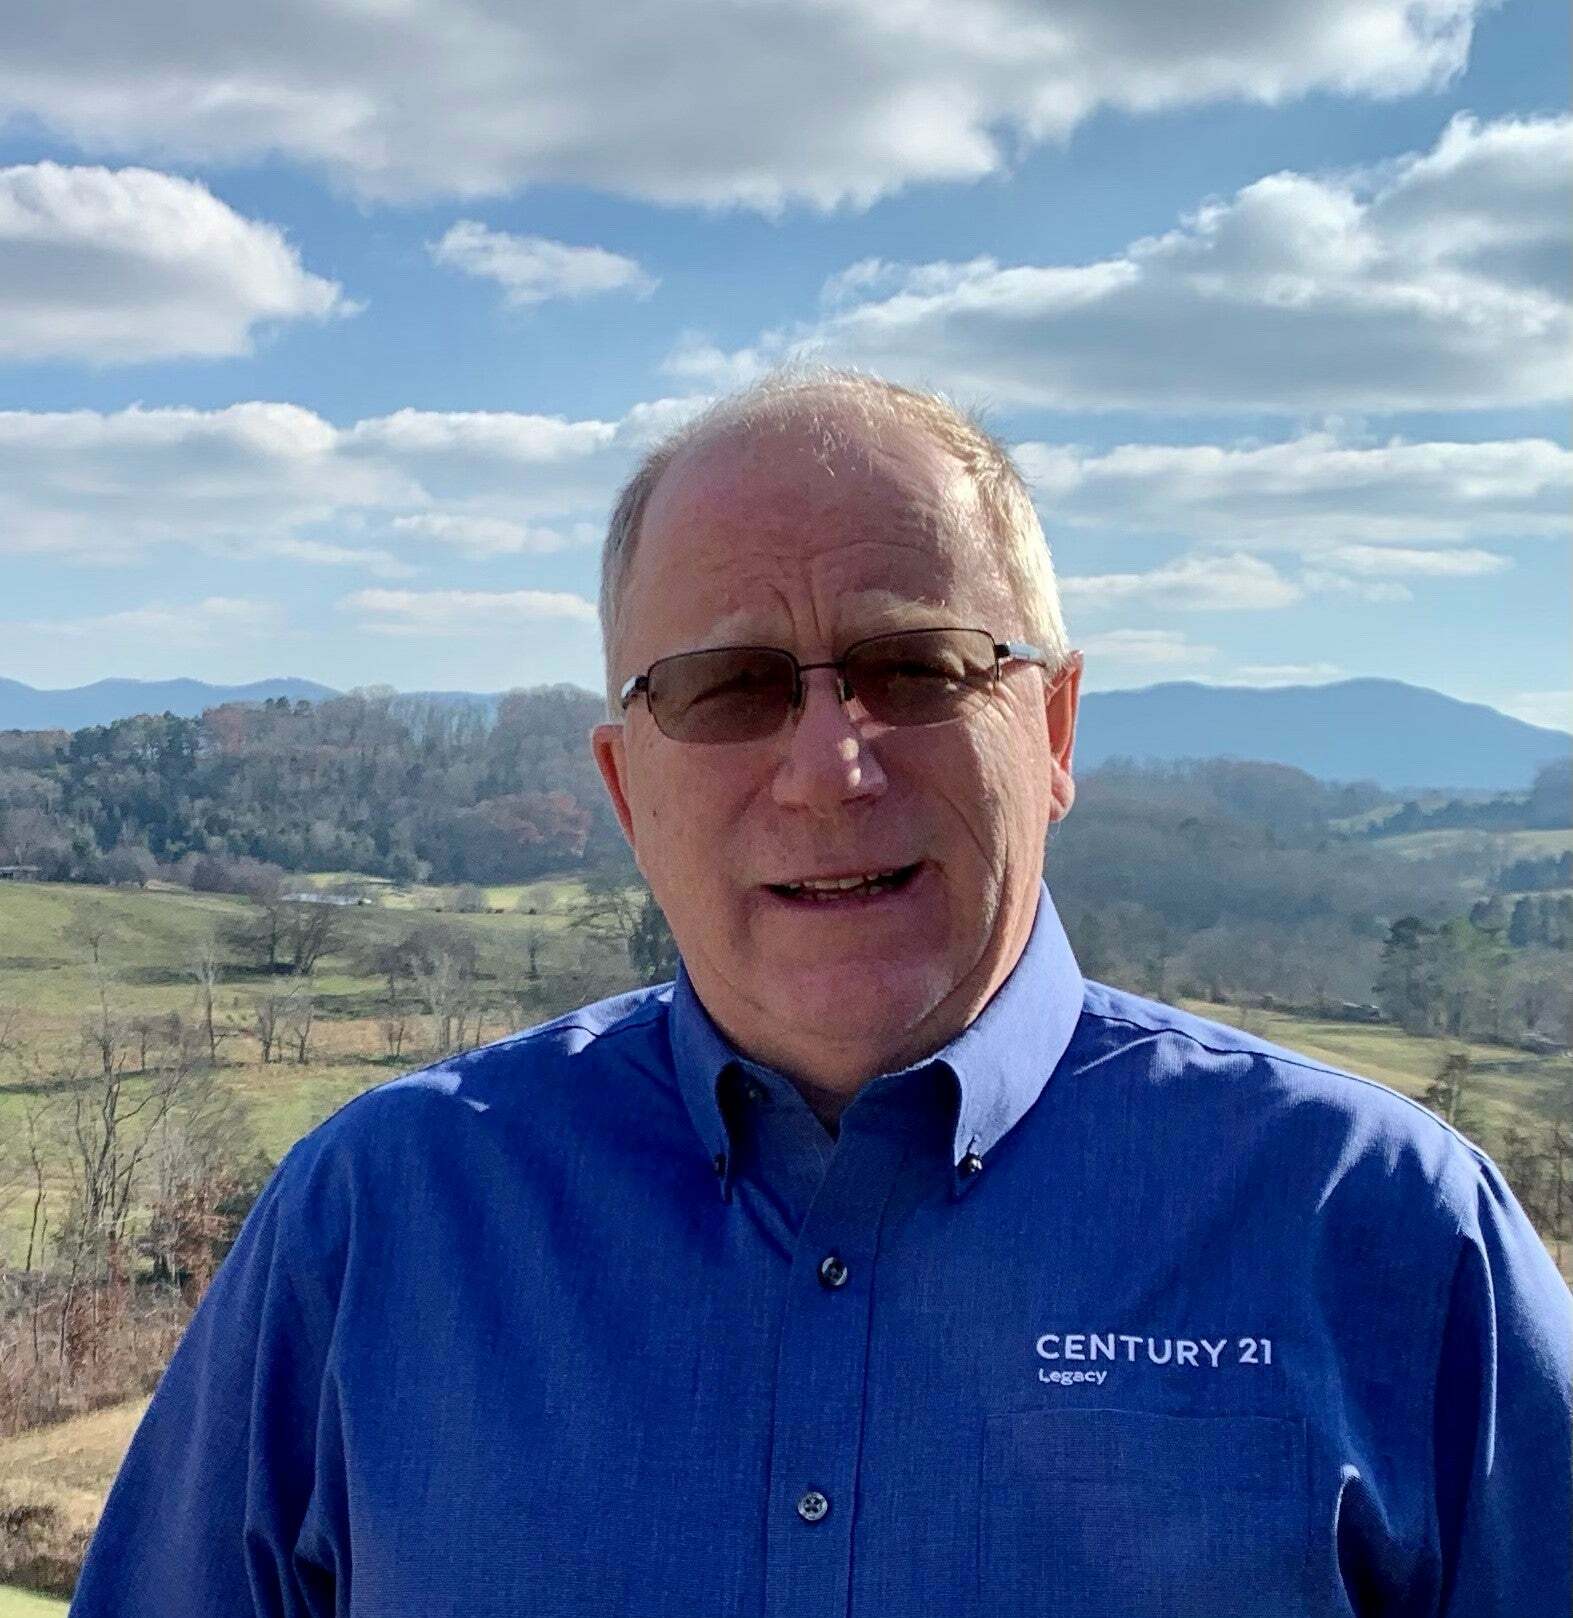 George Francisco, Real Estate Salesperson in Greeneville, Legacy